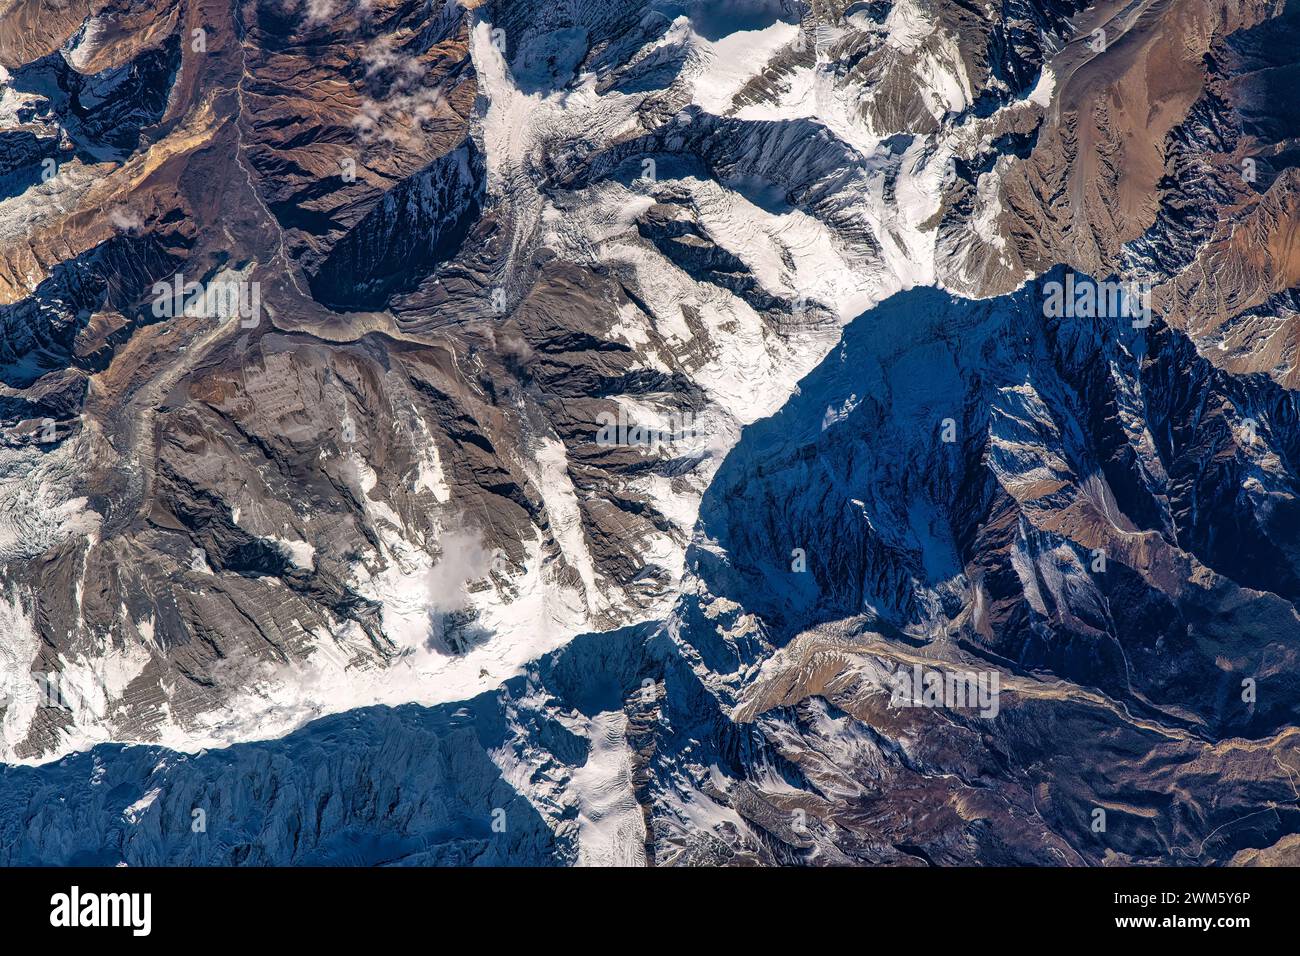 Mountains in Nepal. Digital enhancement of an image by NASA Stock Photo